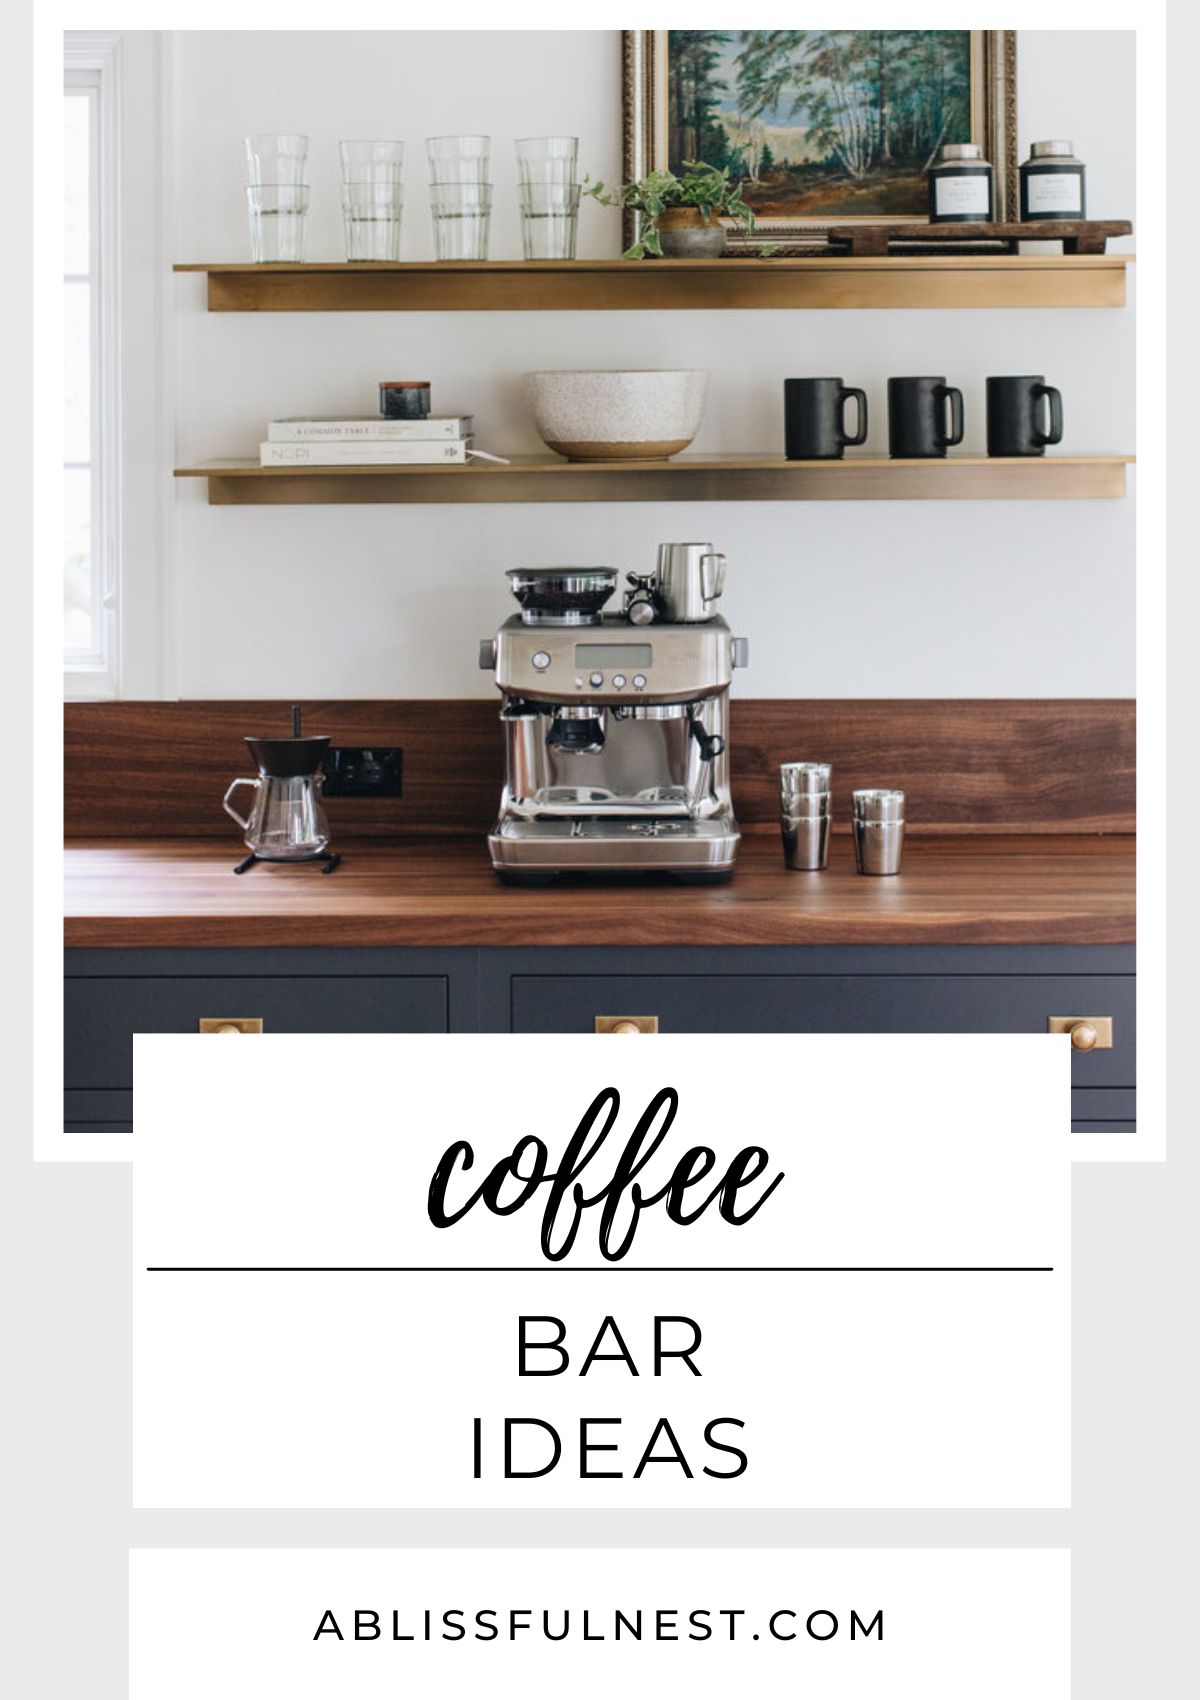 floating shelves above a wood counter in a kitchen hold cups and mugs. Espresso machine on counter